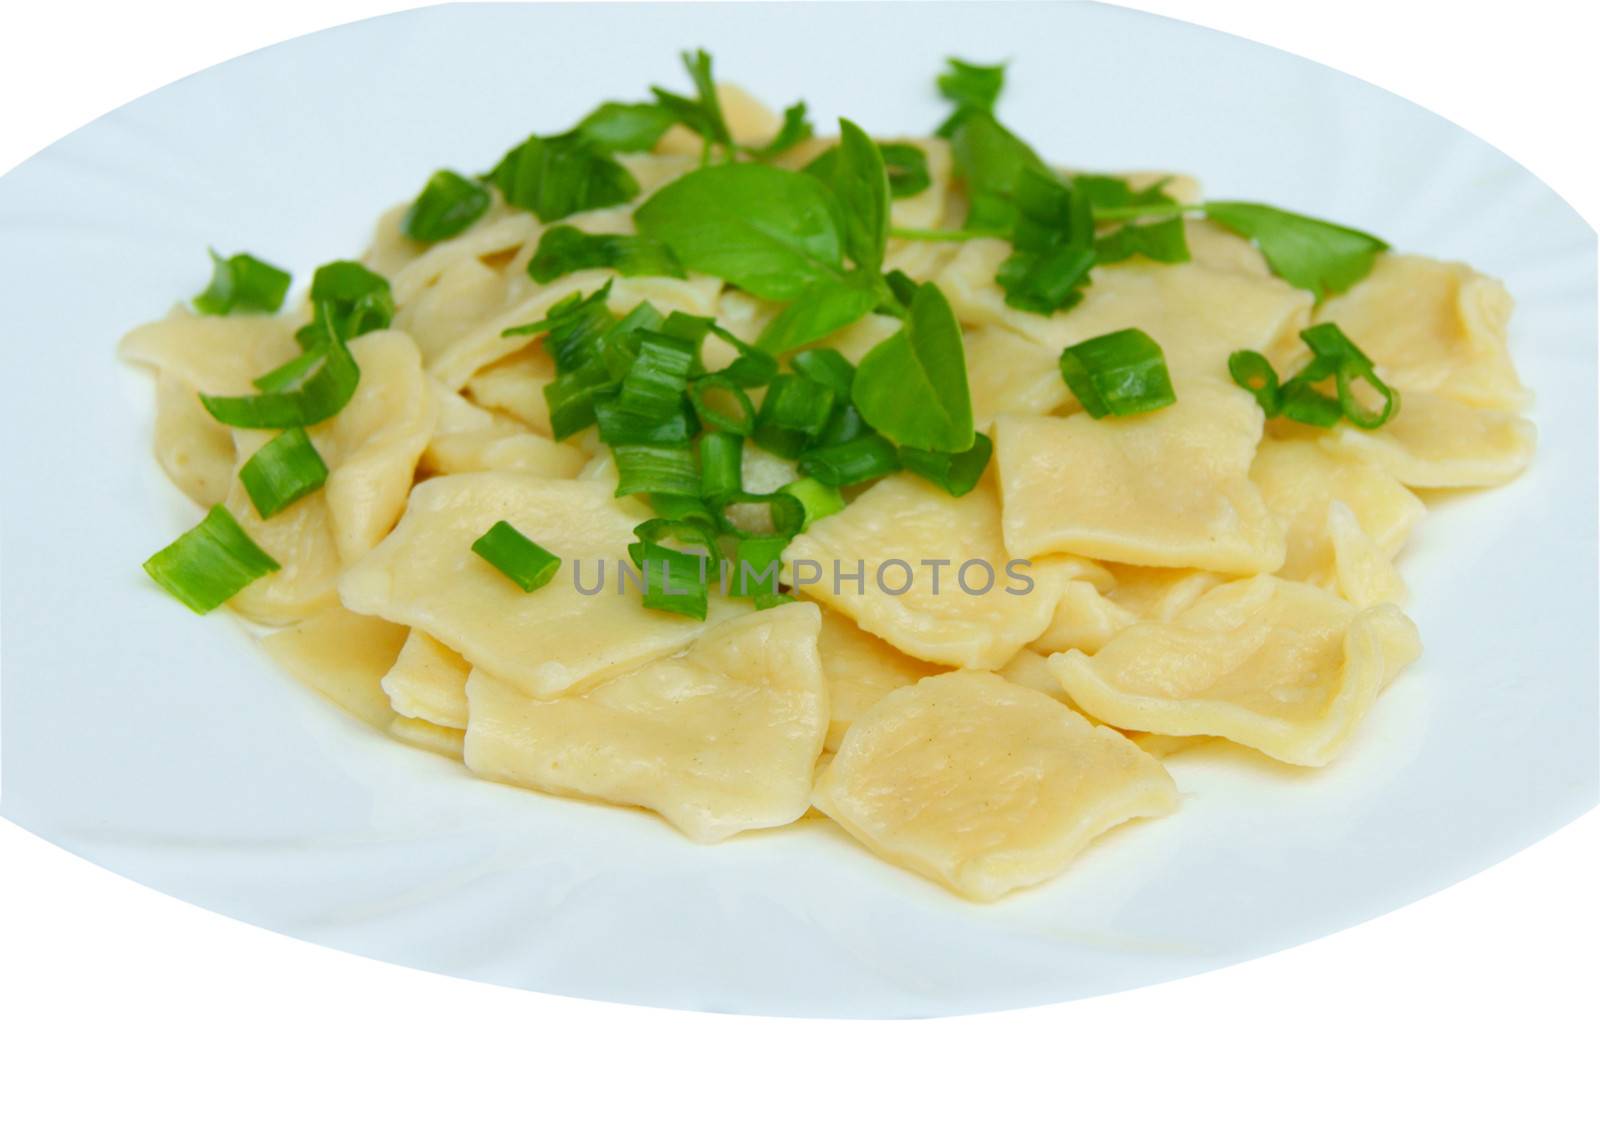 Dumplings with salad on plate on white background